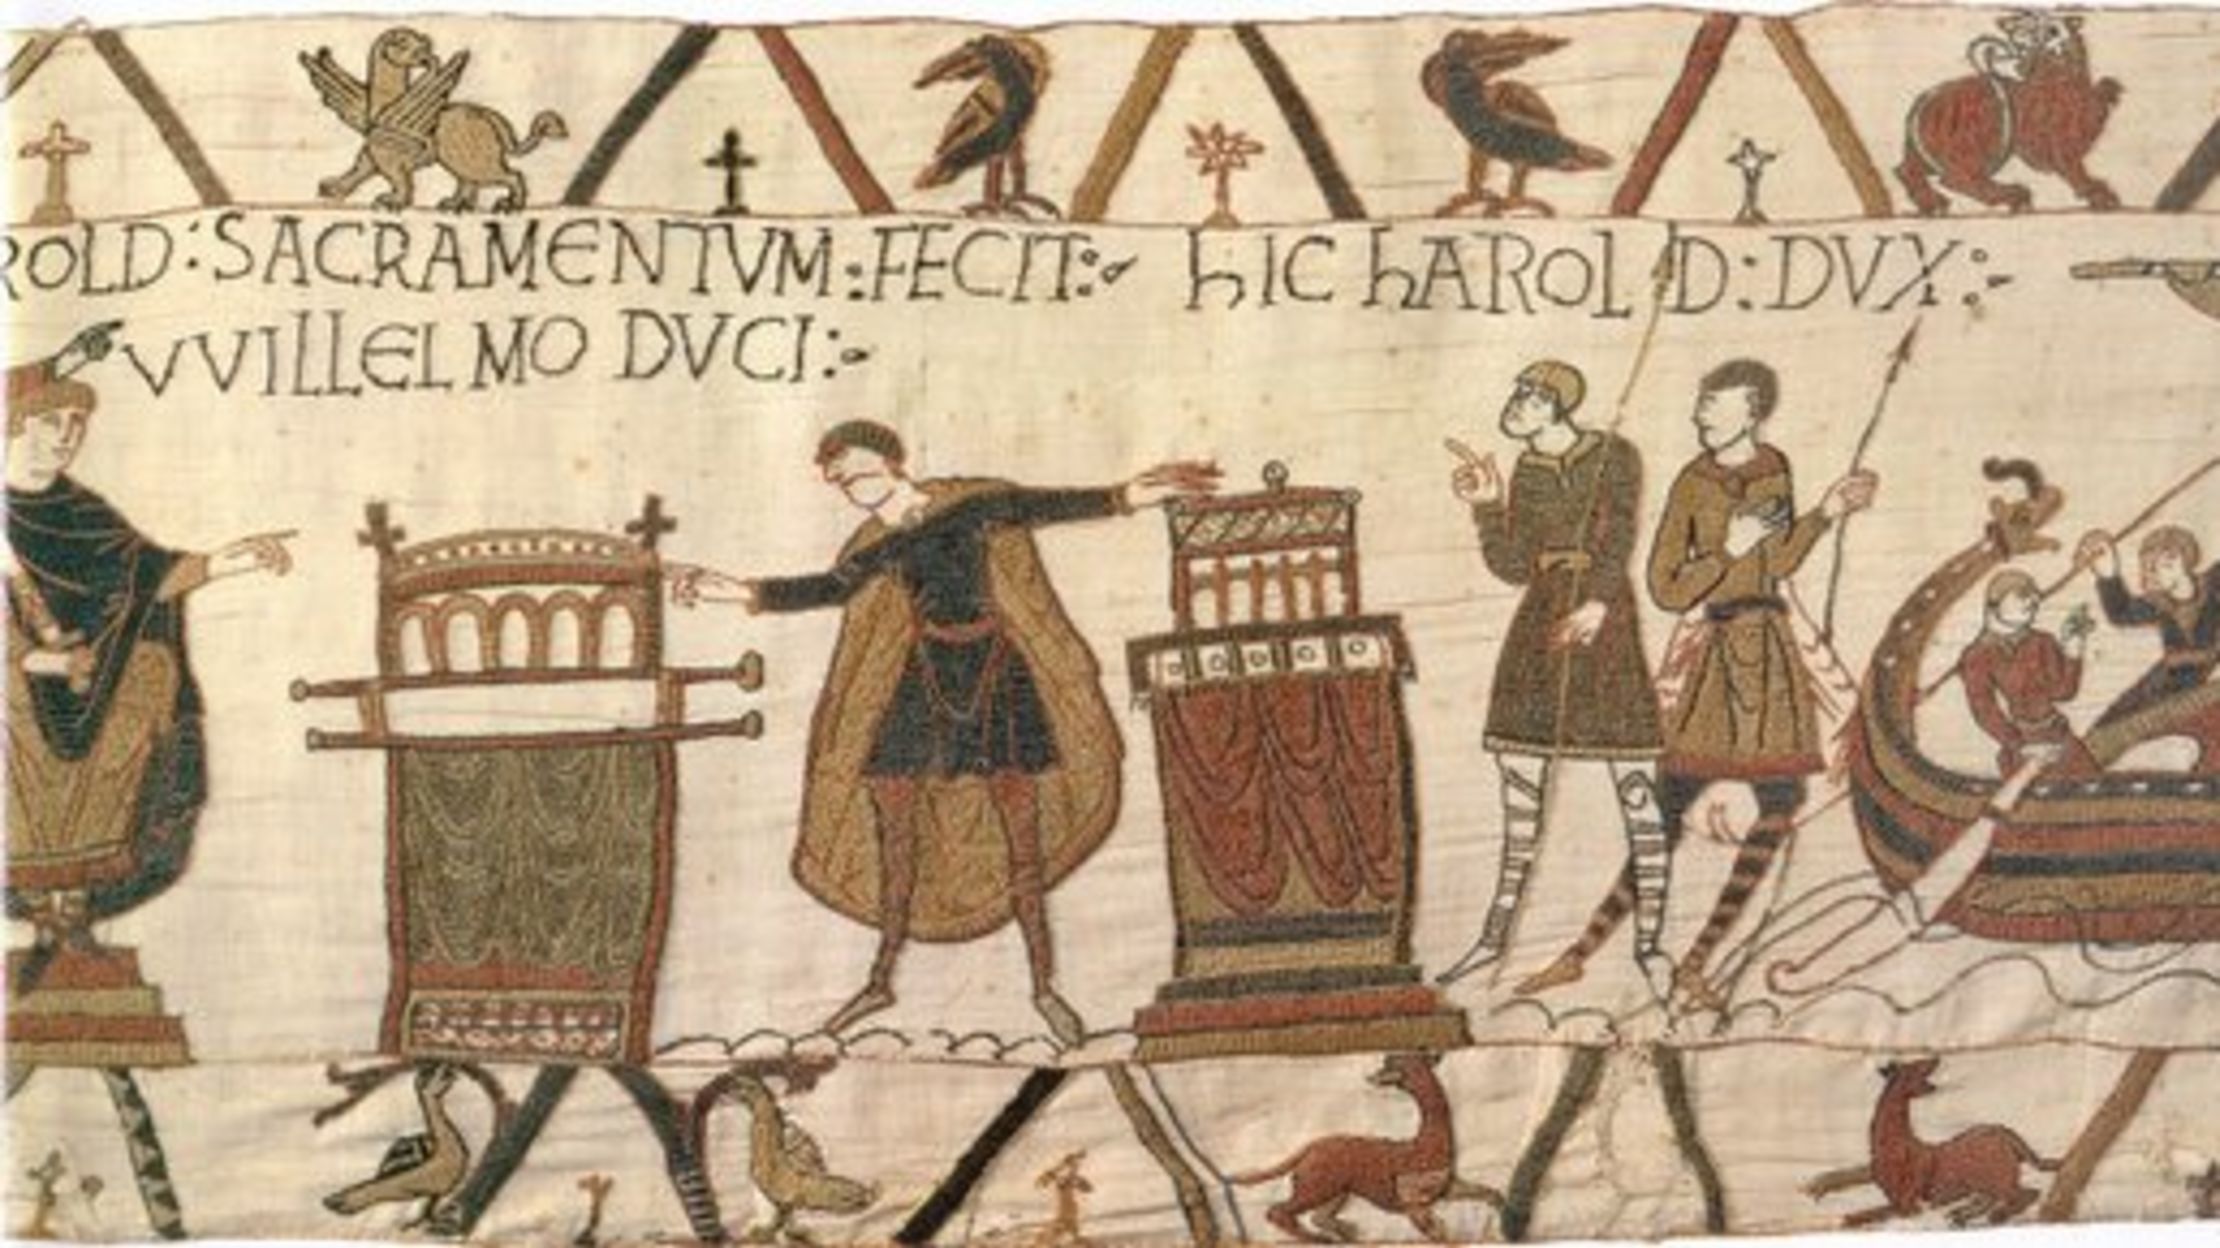 Anachronistic Memes The Best Of The Bayeux Tapestry Mental Floss Trending images and videos related to tapestry! bayeux tapestry